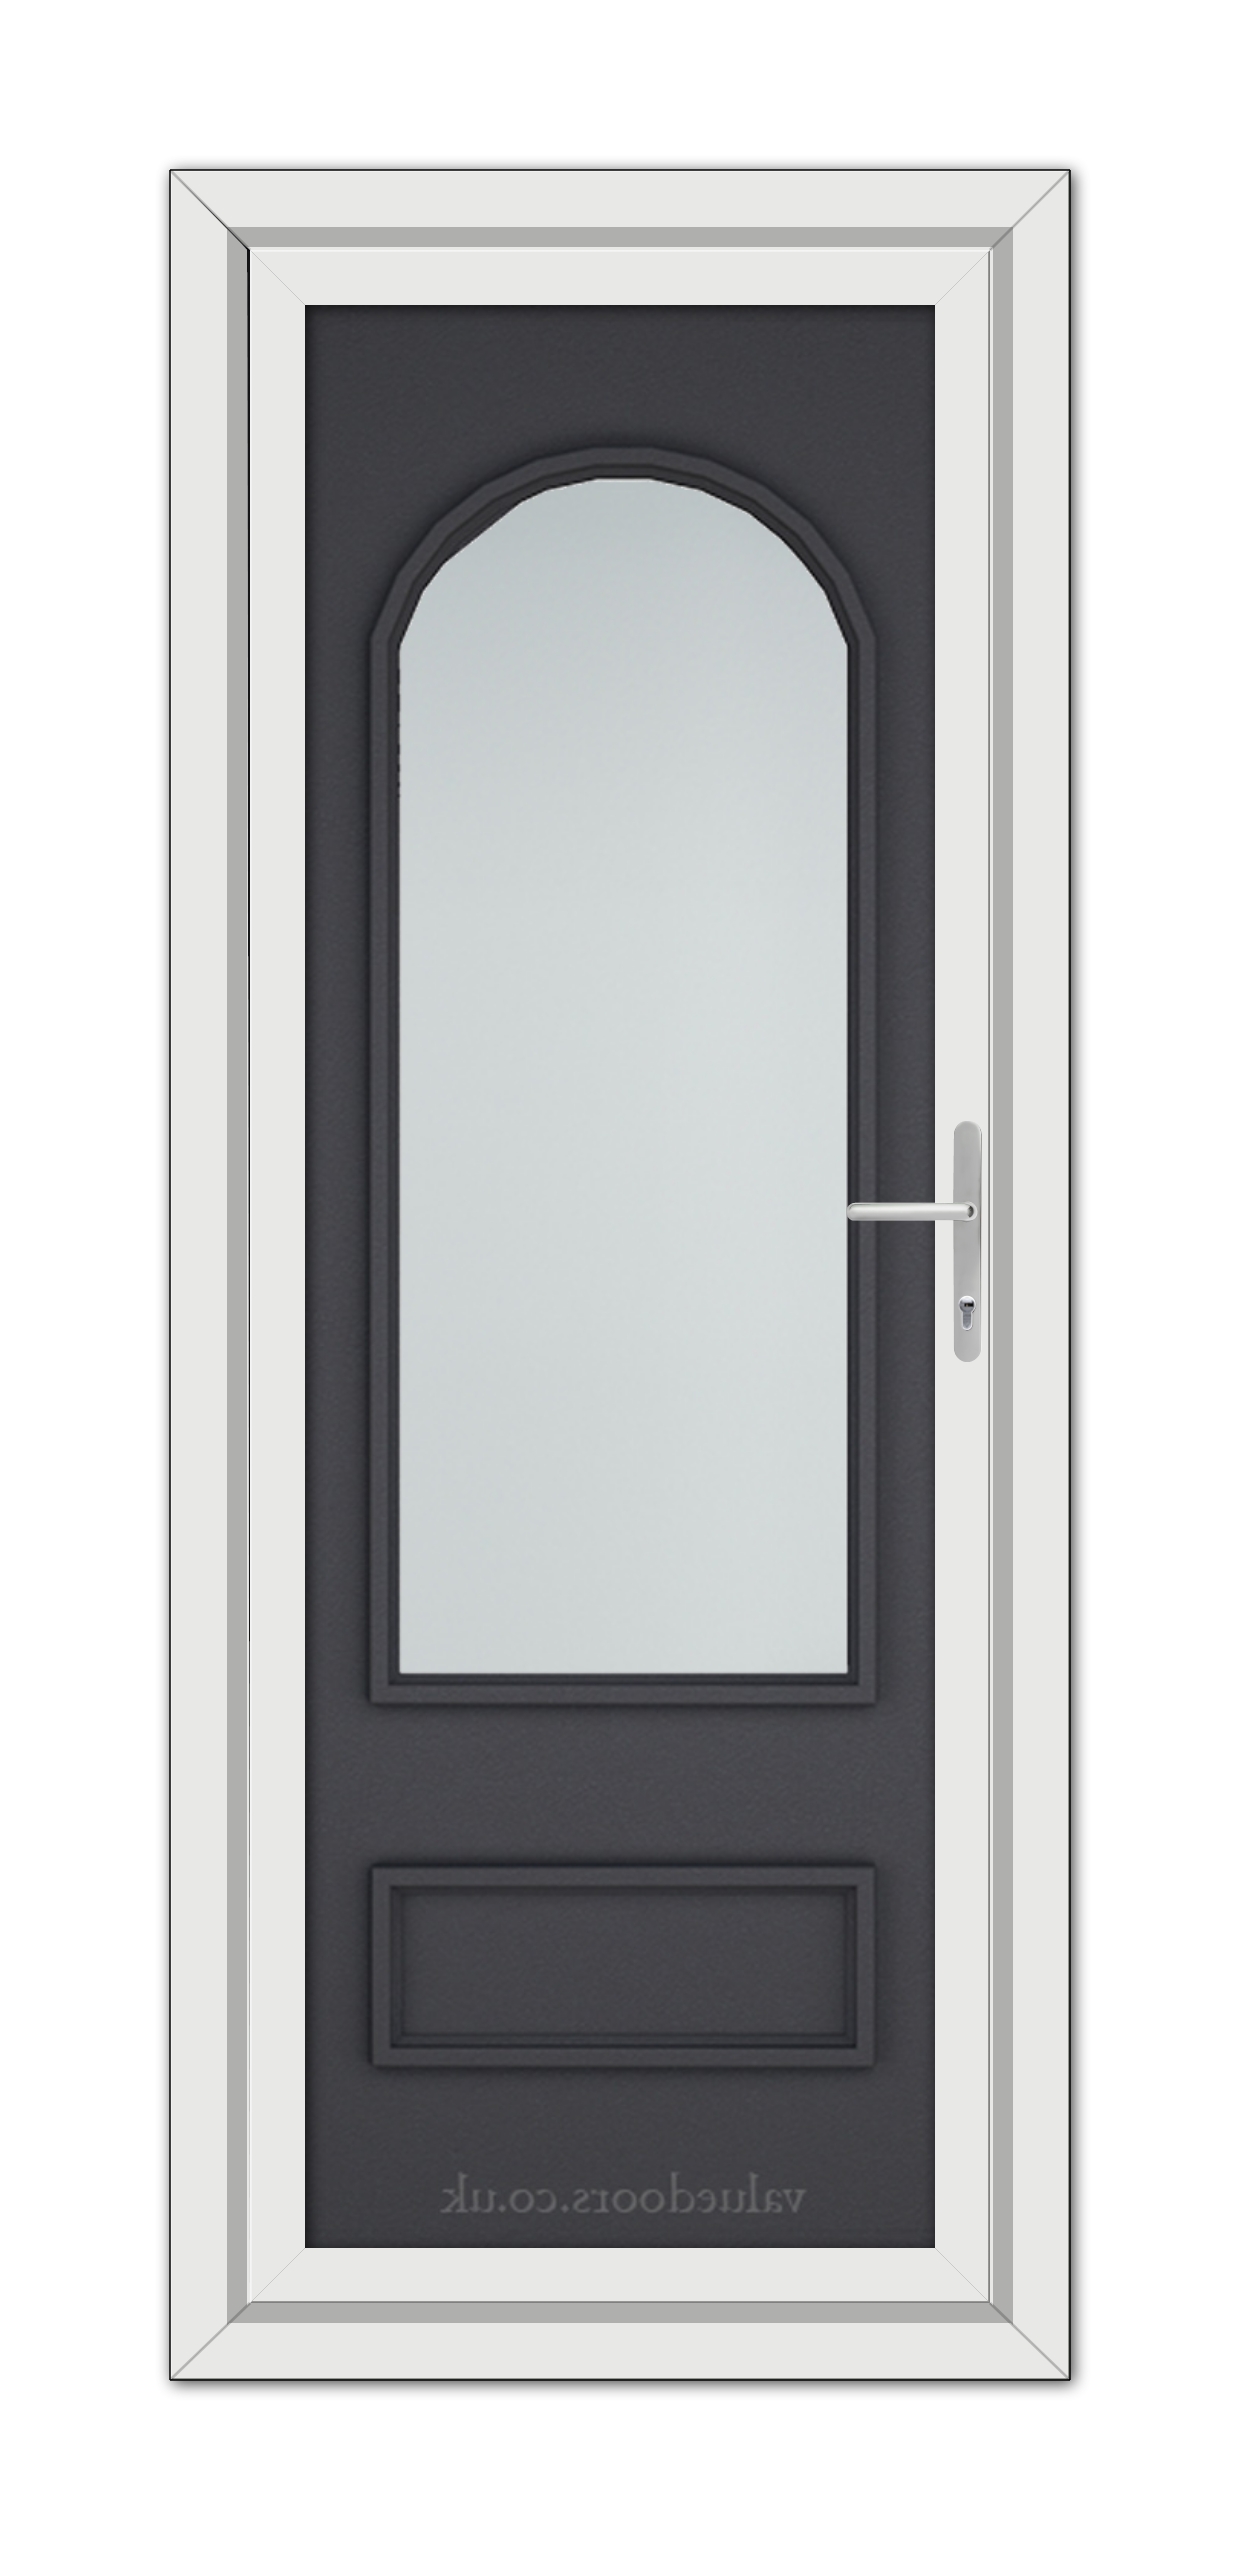 A modern Grey Grained Canterbury uPVC Door with a vertical arched window, framed in white, featuring a silver handle on the right side.